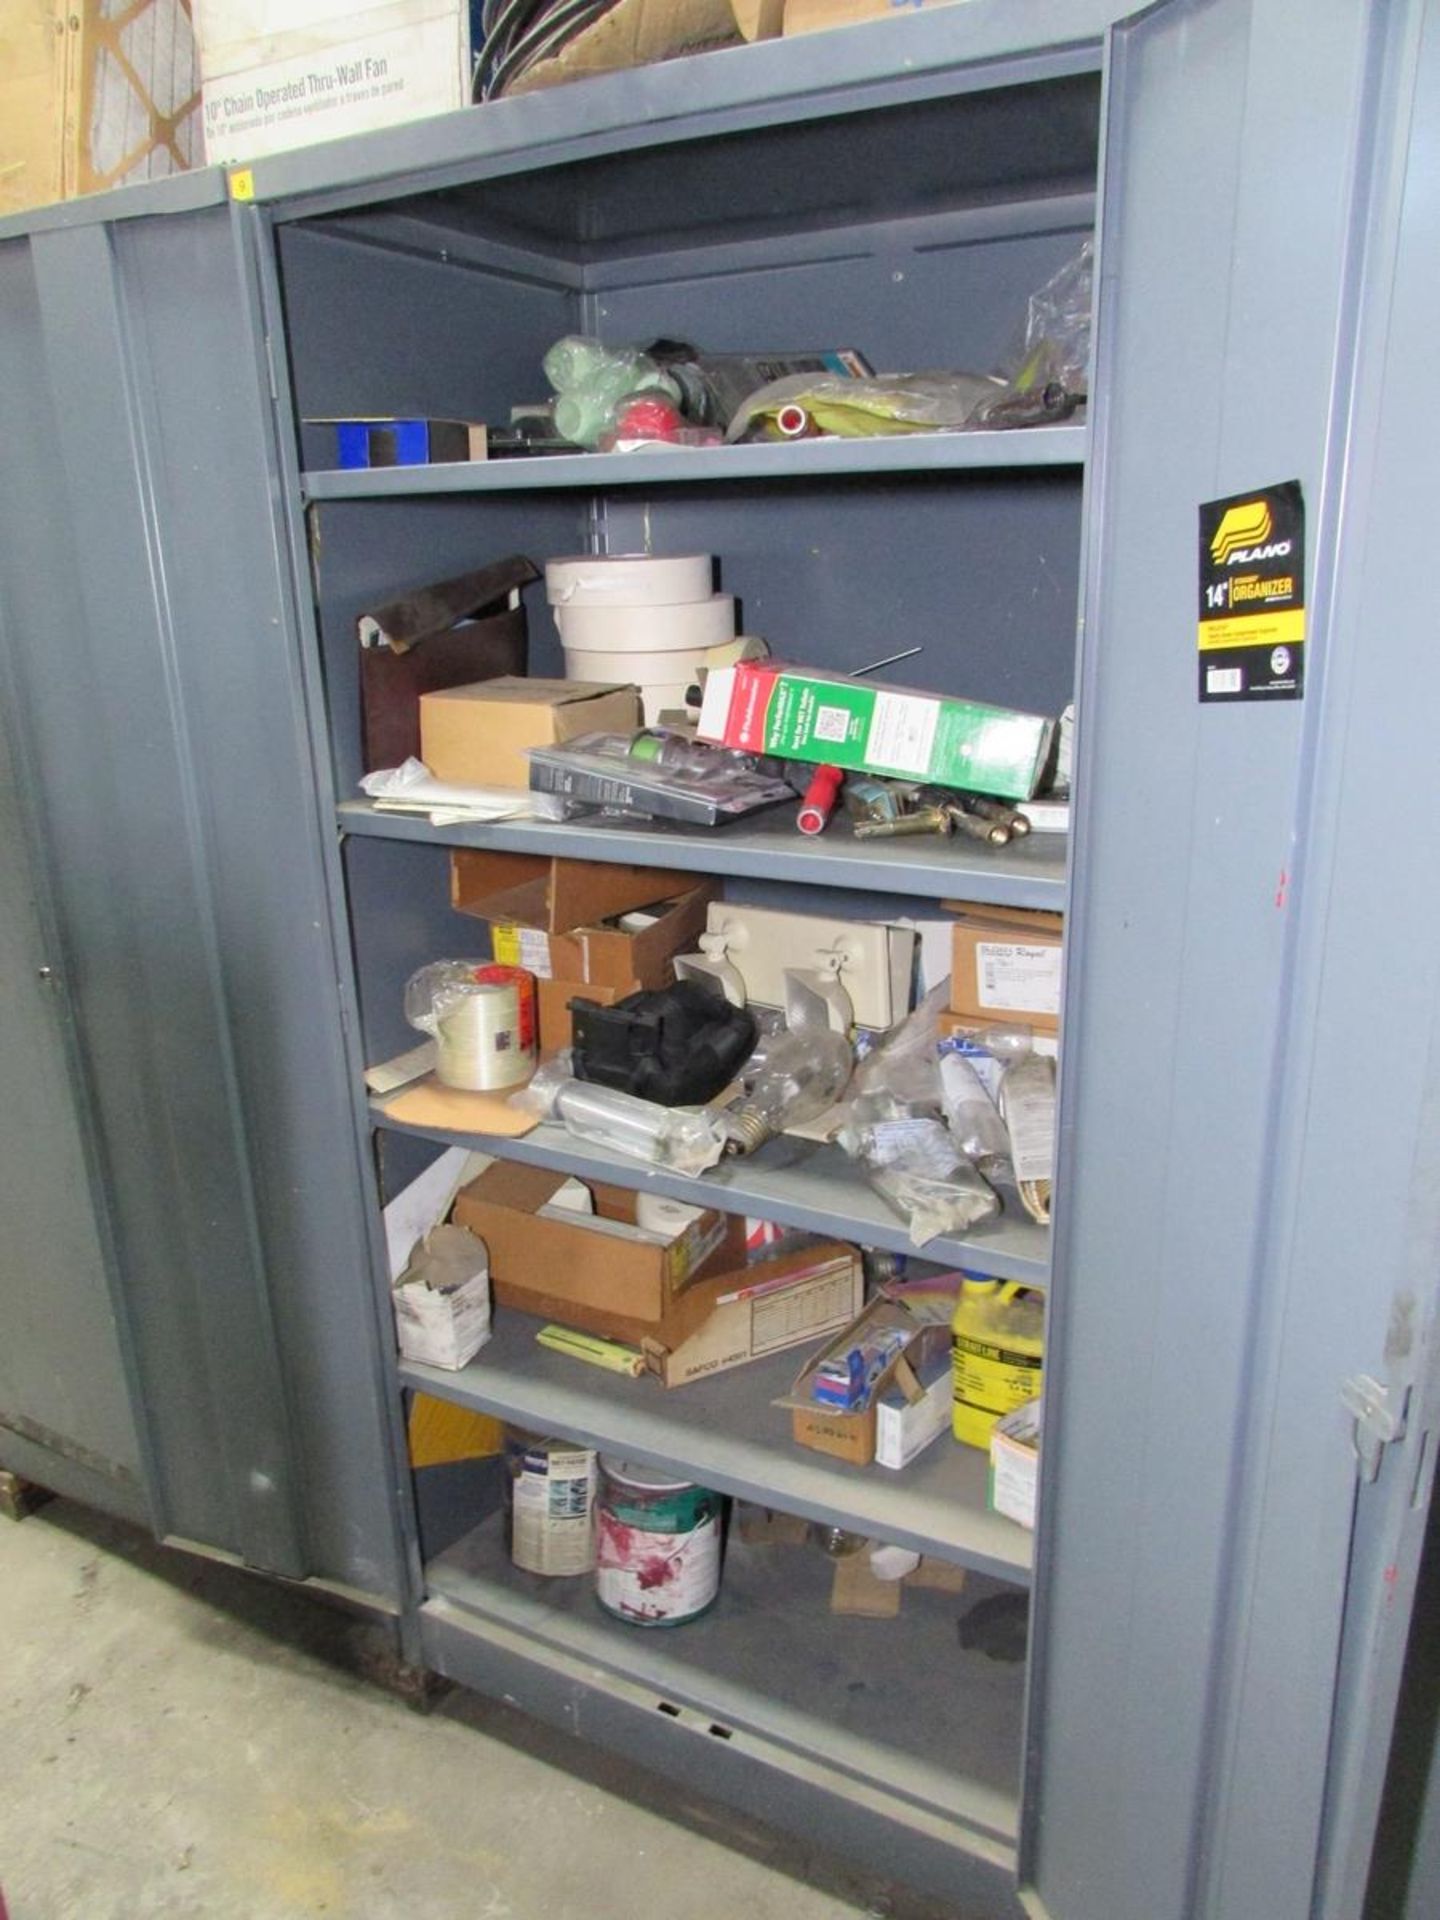 LOT - (2) 2-DOOR CABINETS, W/ CONTENTS: ASSORTED PAINT SUPPLIES, BATHROOM FACILITY PARTS, ETC. - Image 5 of 8